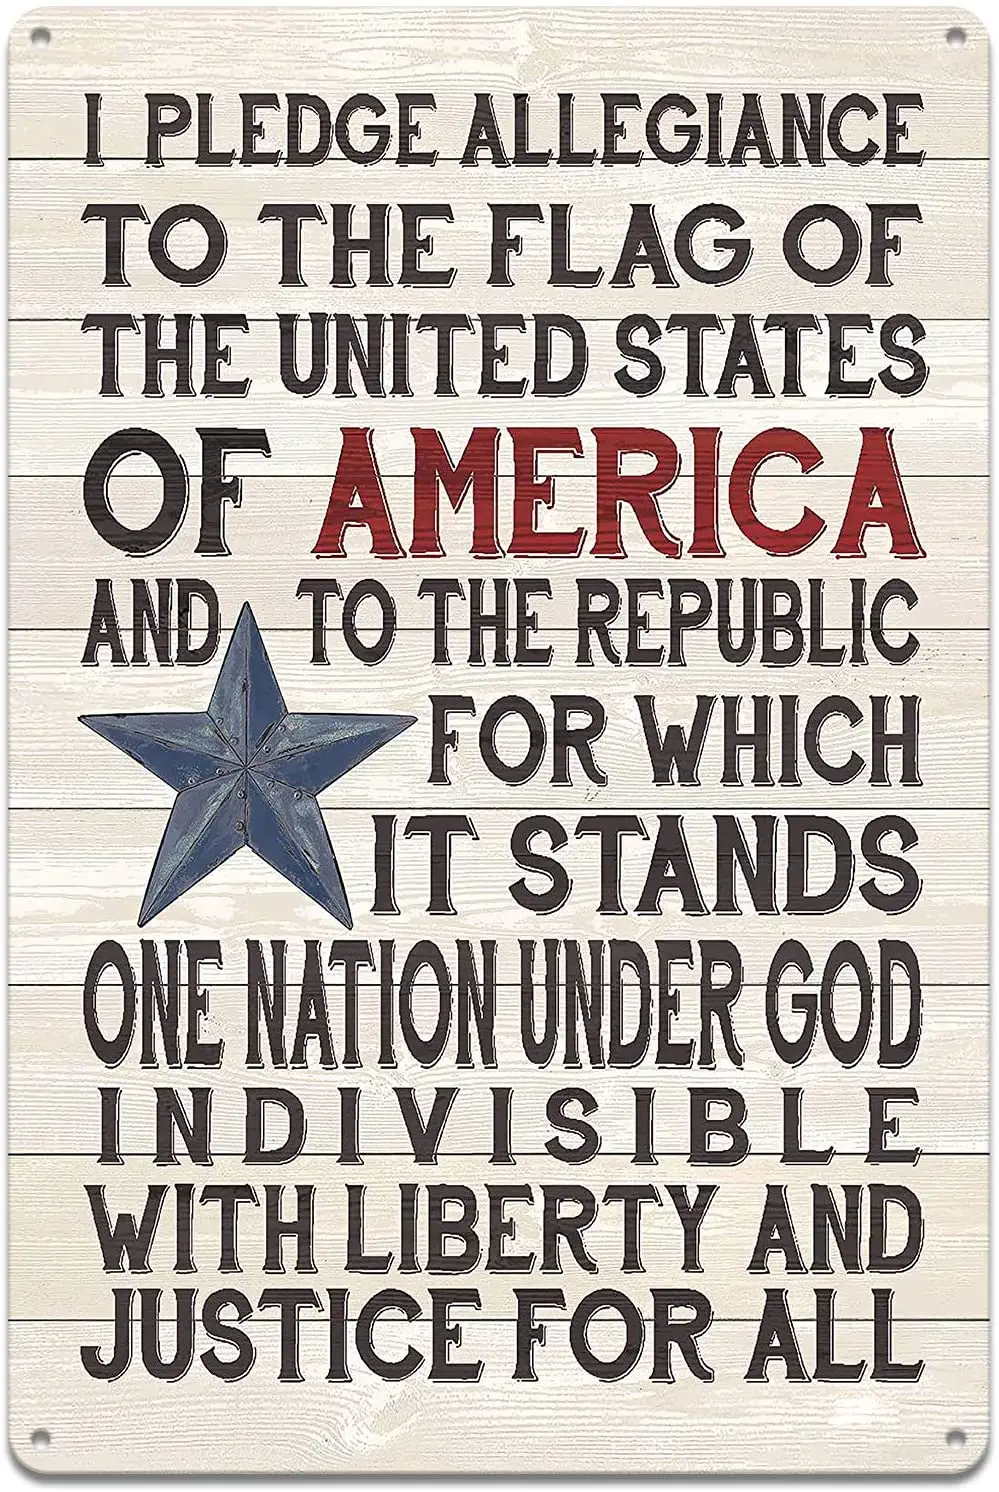 Metal Sign, I Pledge Allegiance Patriotic Poster Rustic Wood Sign, Posters for The Wall, Wall Art, 12x8 inch wood sign wall house modern home decoration wall art wooden block mdf sign tabletop home art letters 2020 new design colorful